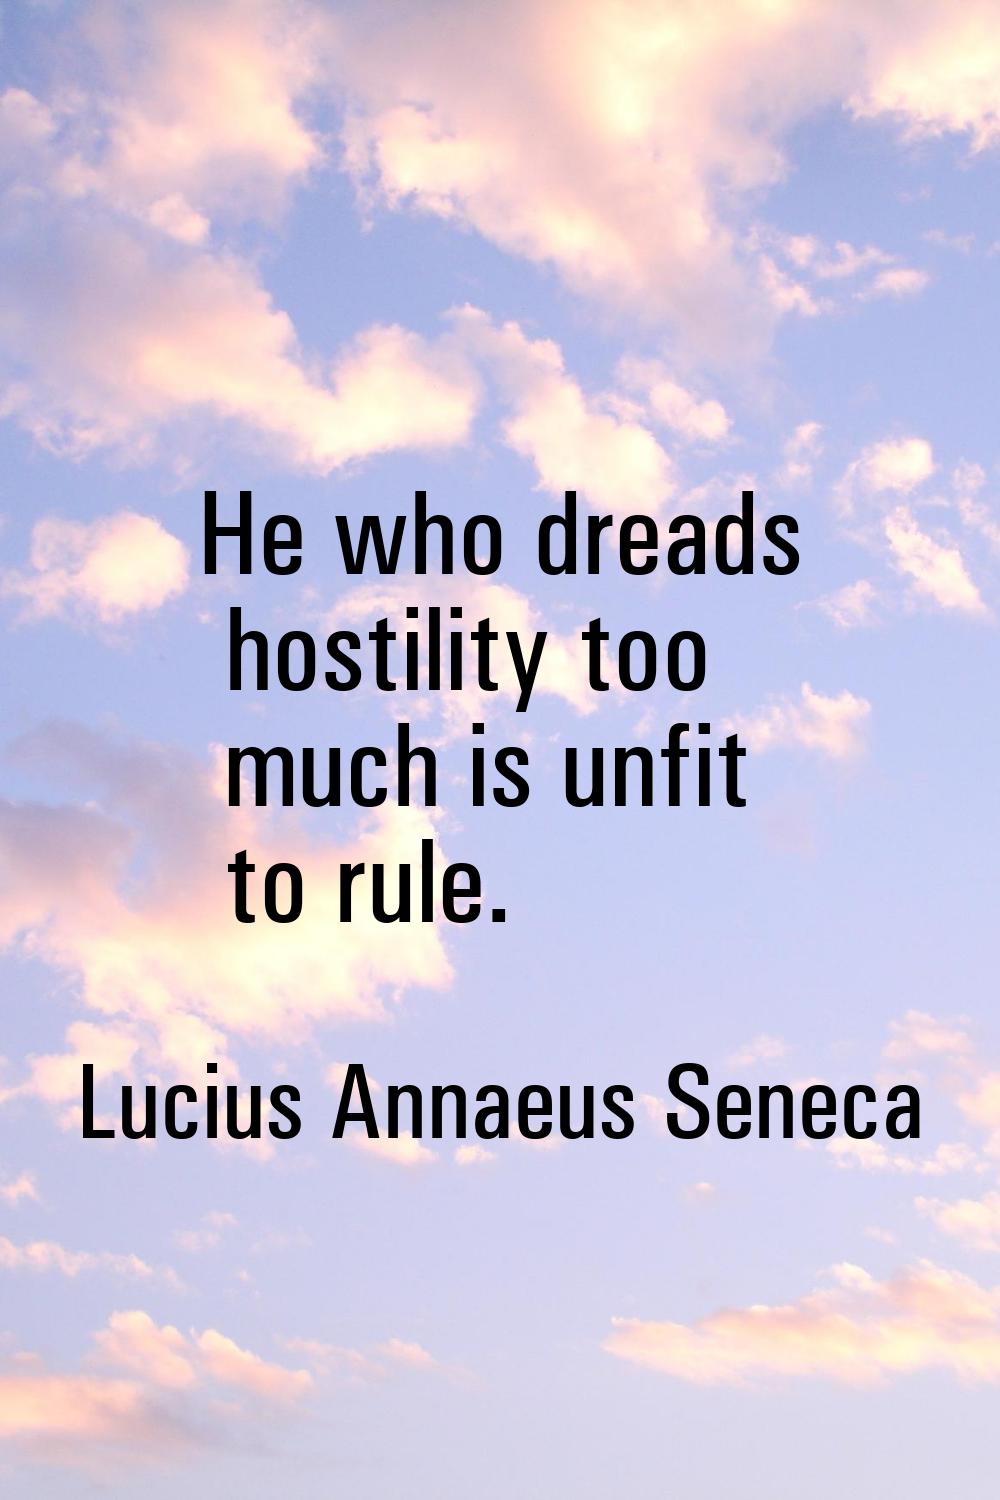 He who dreads hostility too much is unfit to rule.